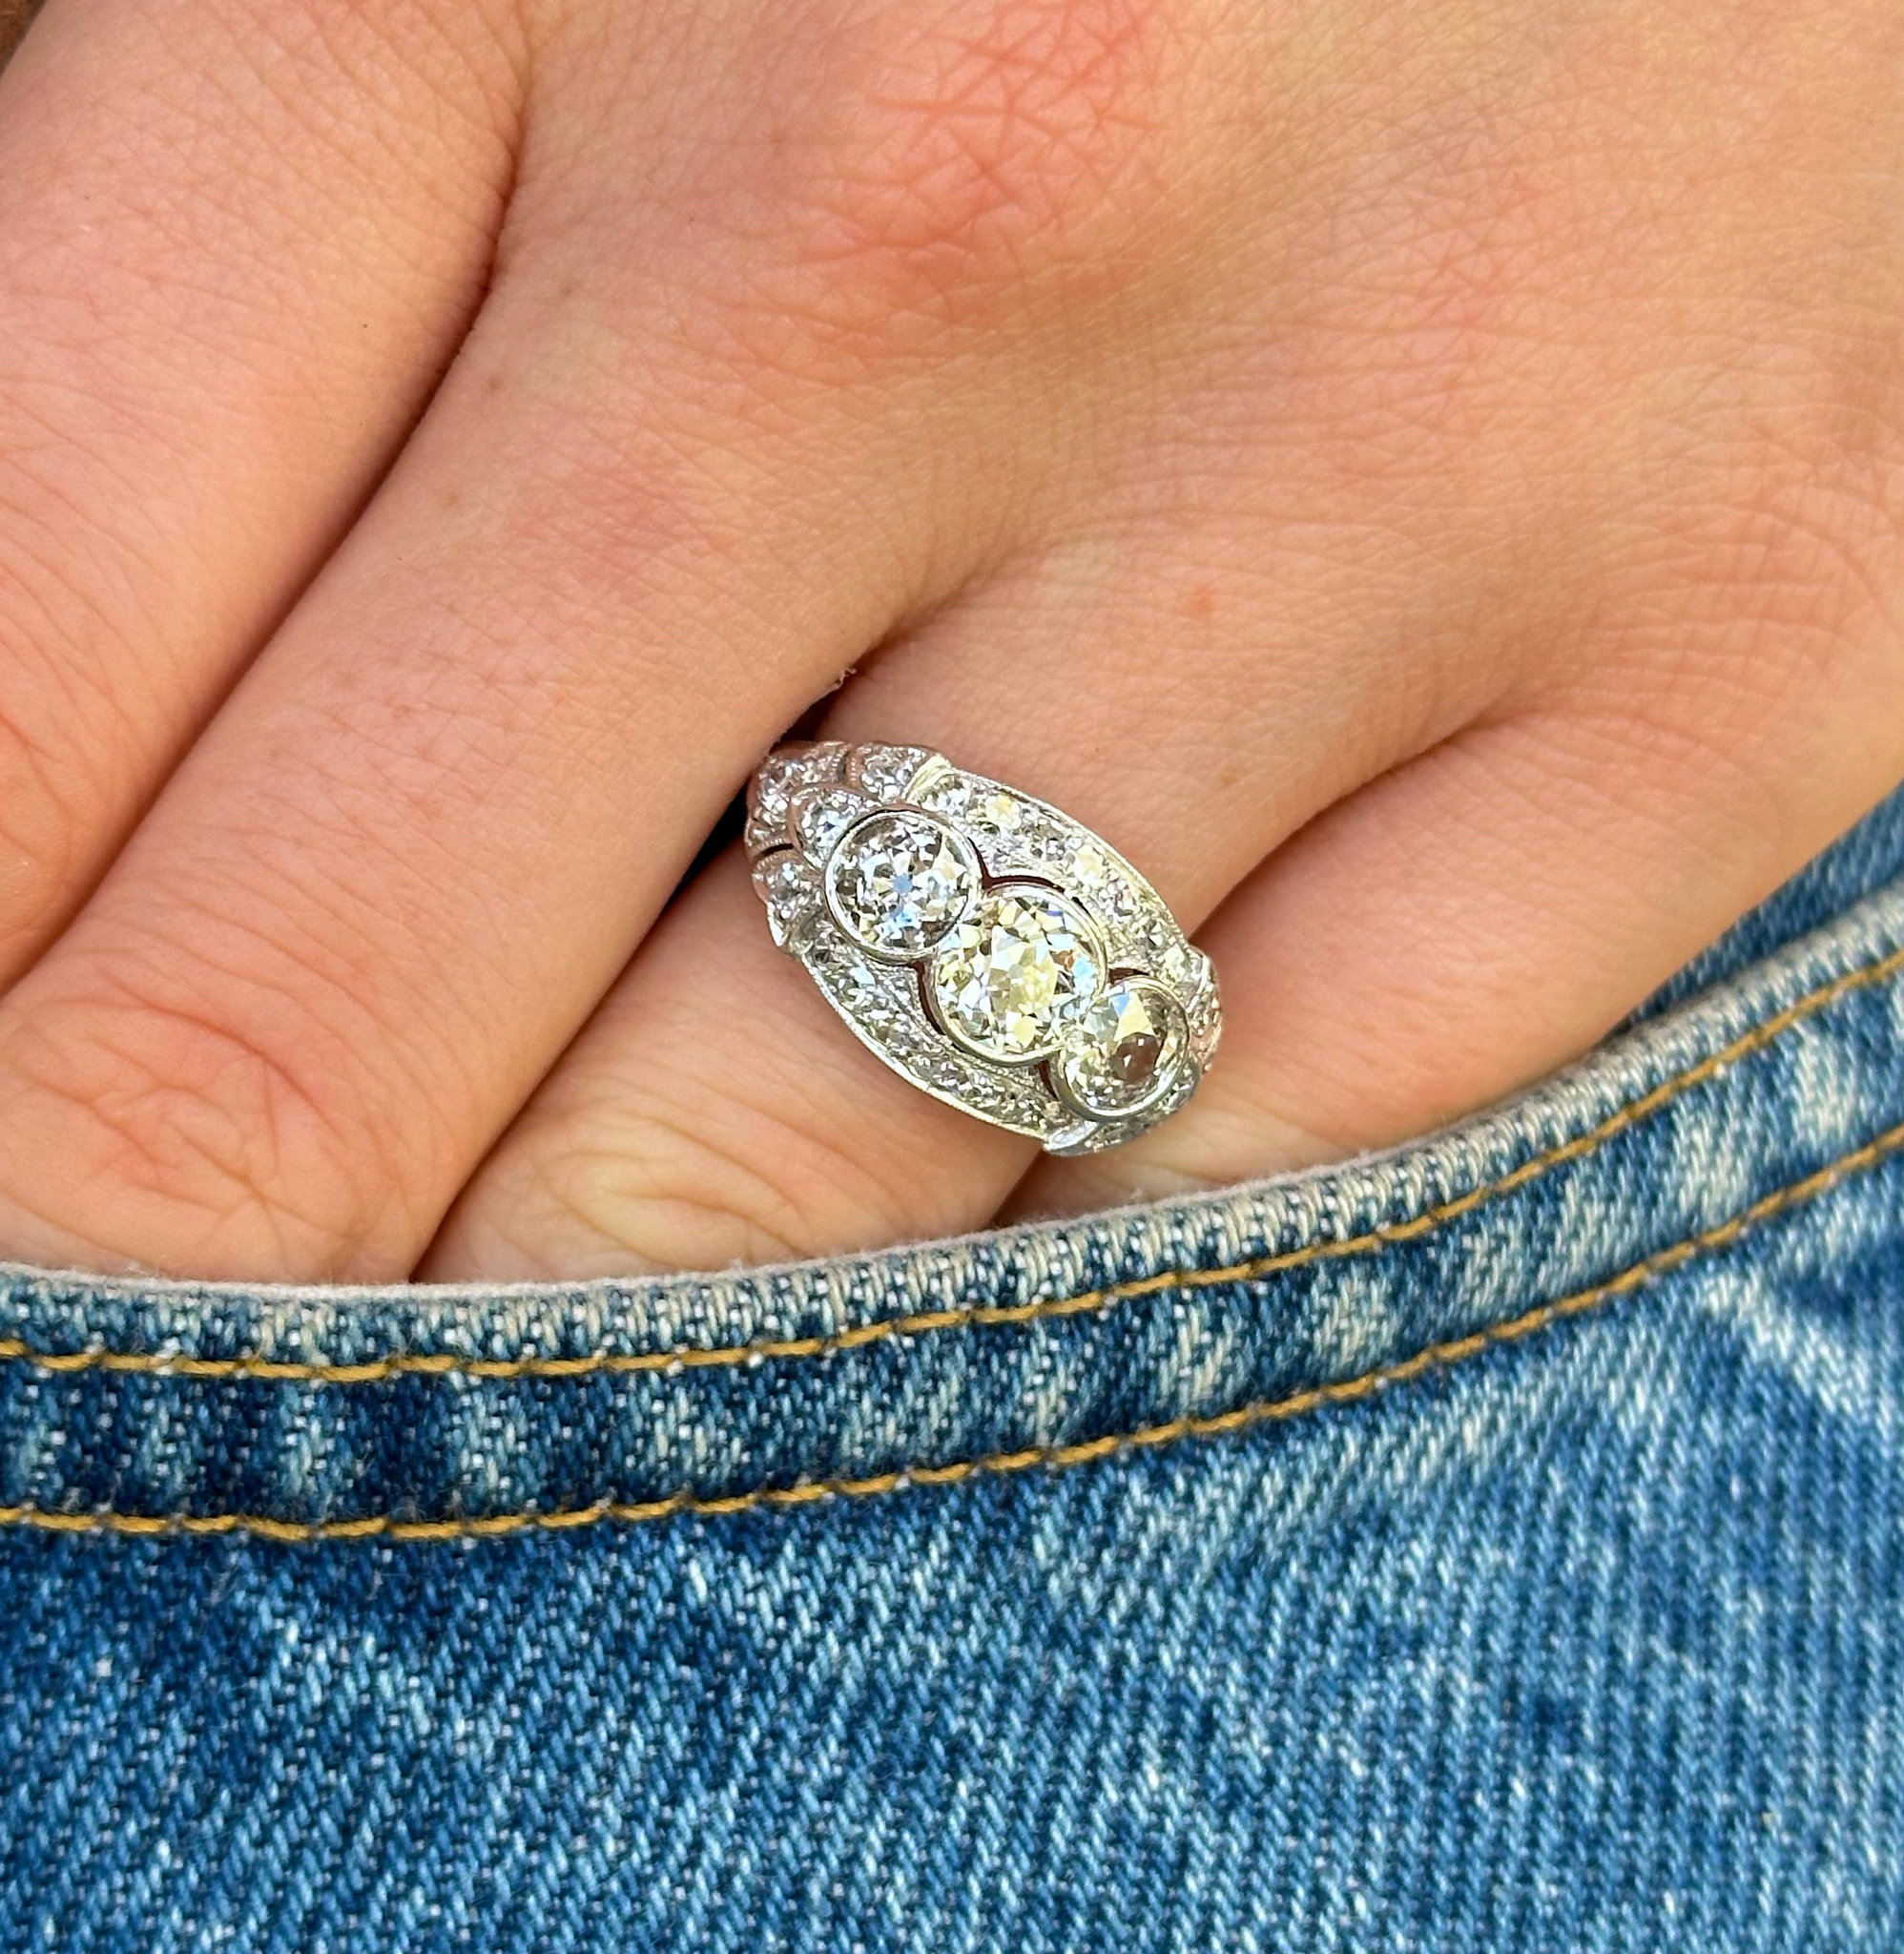 Vintage, Art Deco Diamond Three-Stone Engagement Ring, worn on hand in pocket of jeans.